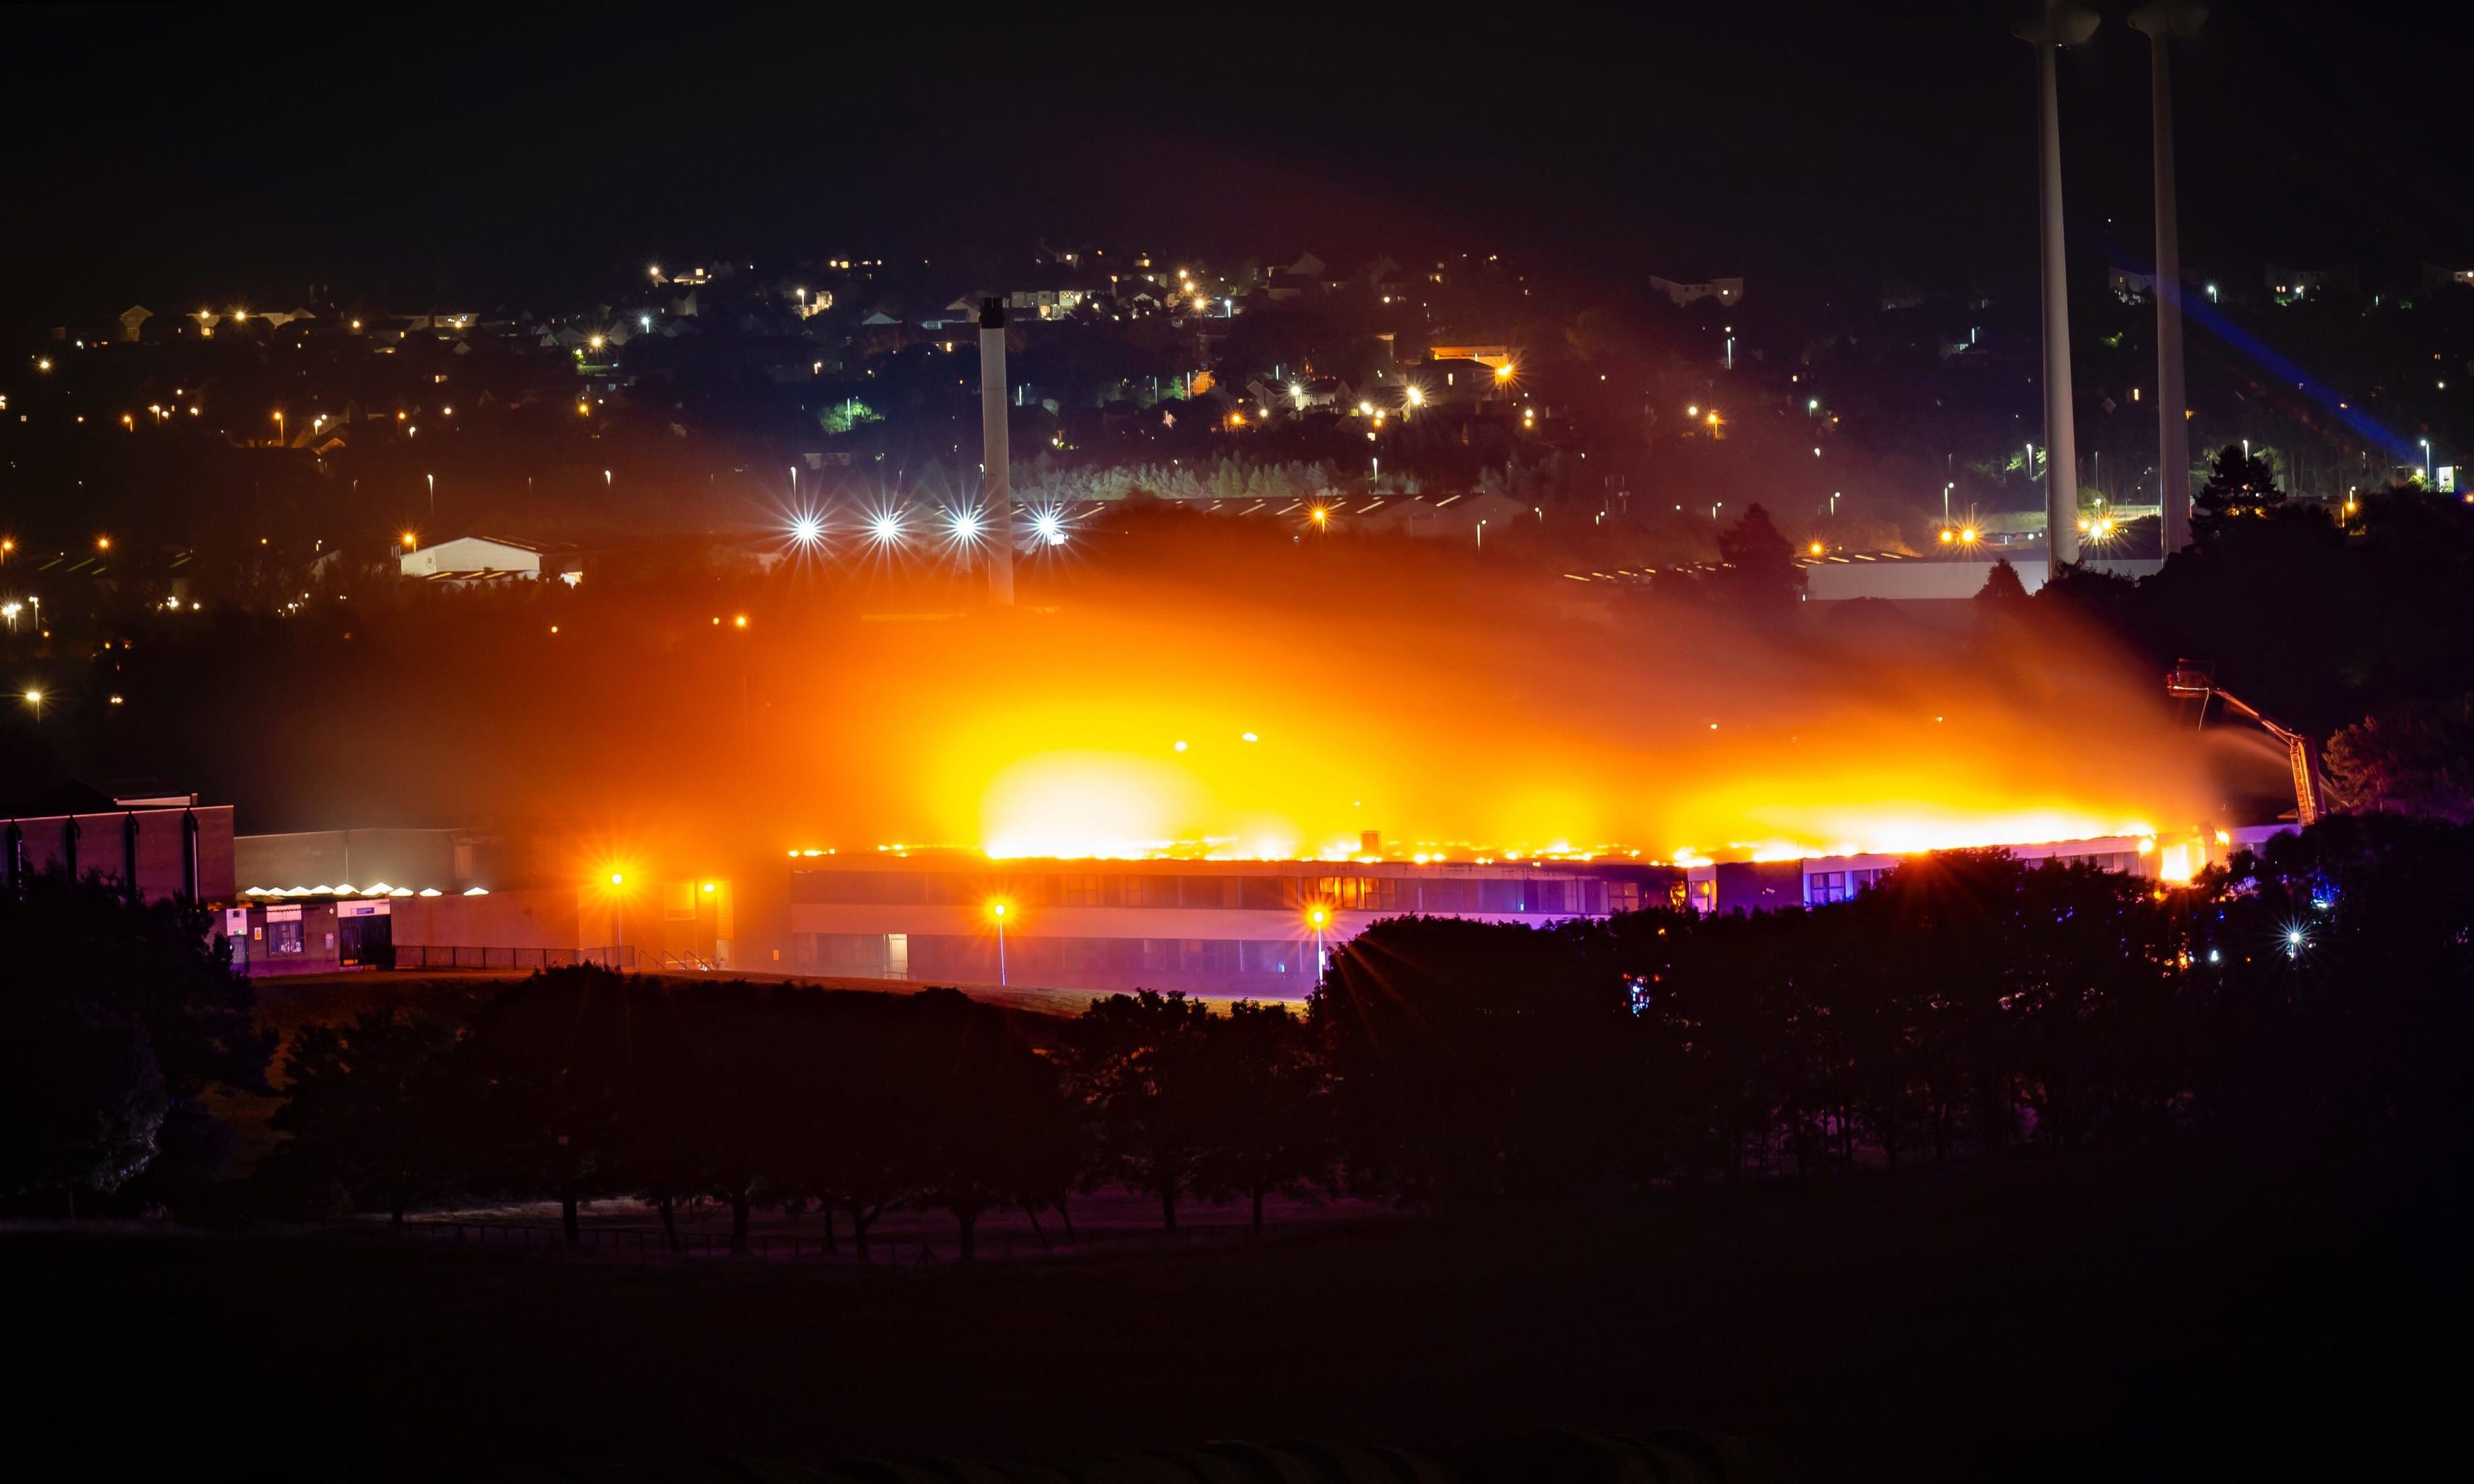 The fire at Braeview. Credit: Scott McBride - Point One Photography